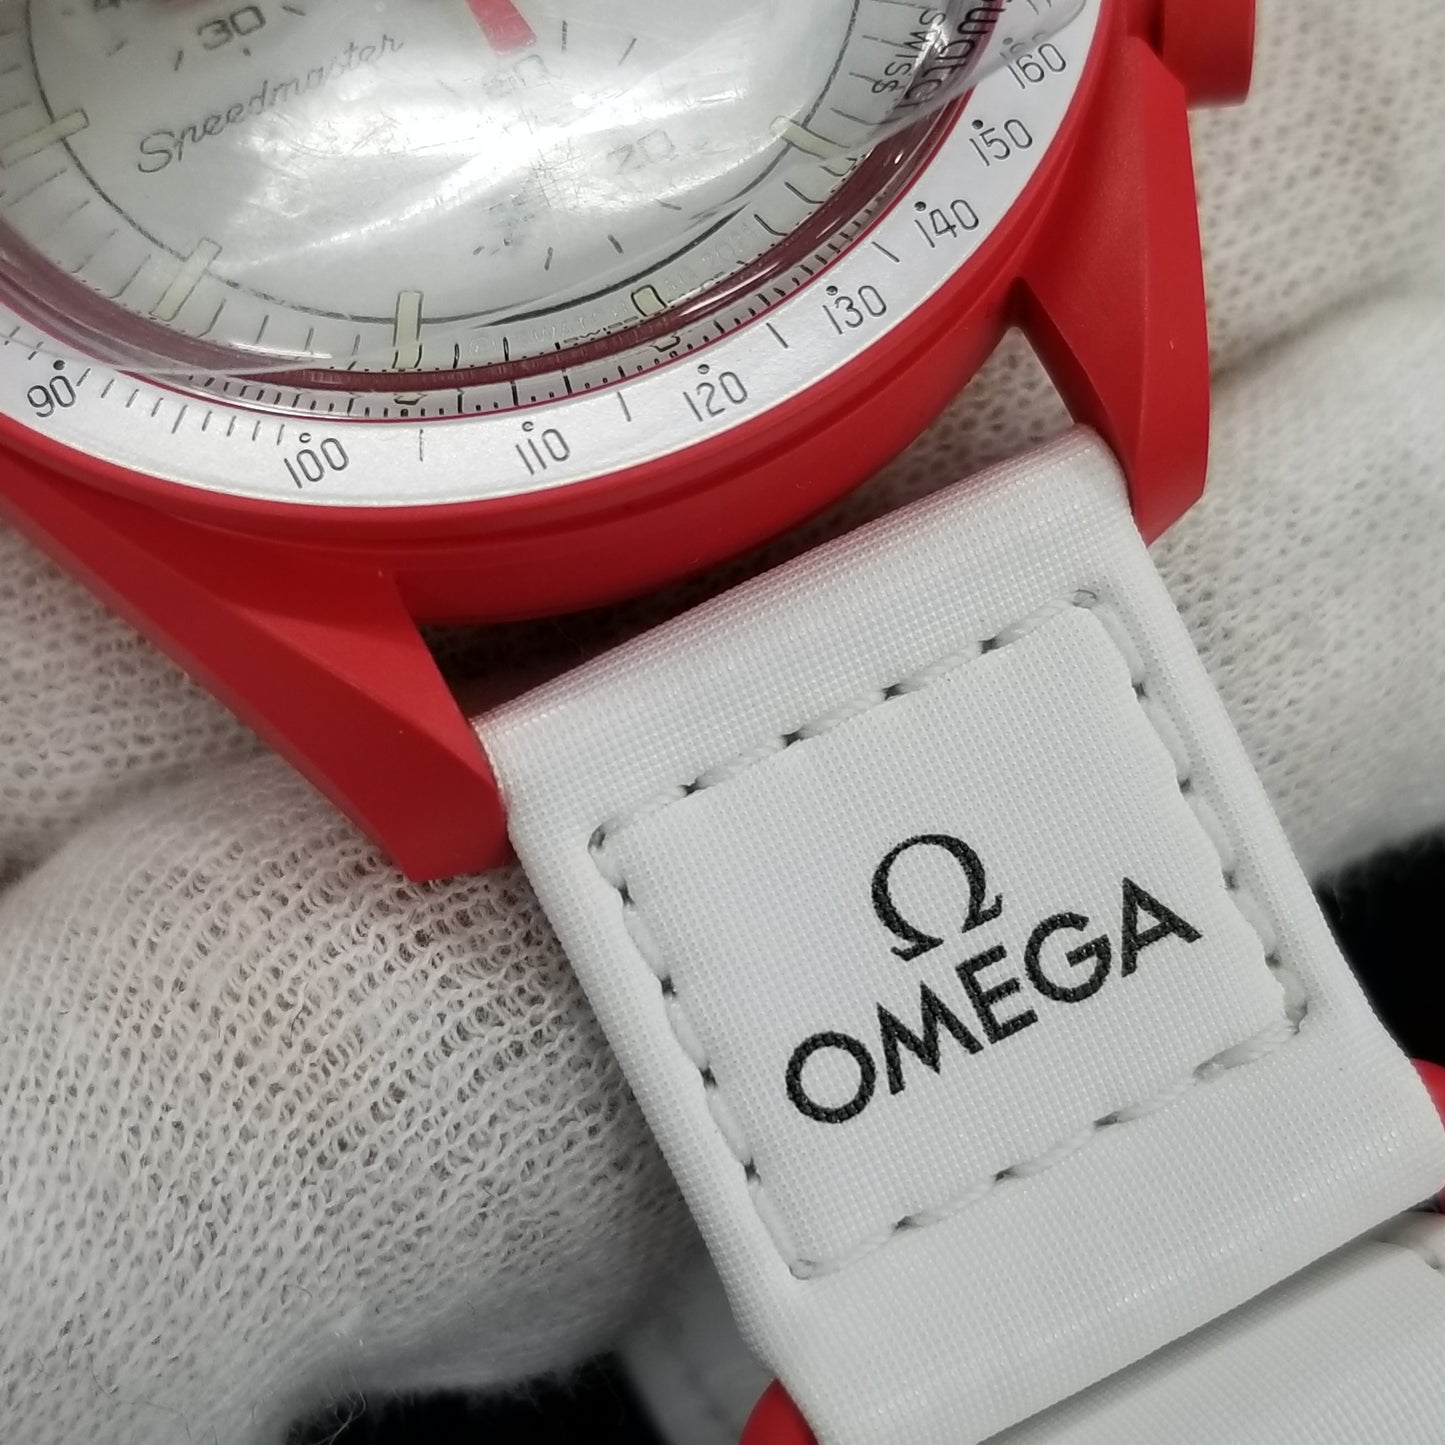 SO33R100 OMEGA×SWATCH MISSION TO THE SUN 2SWT33-00005